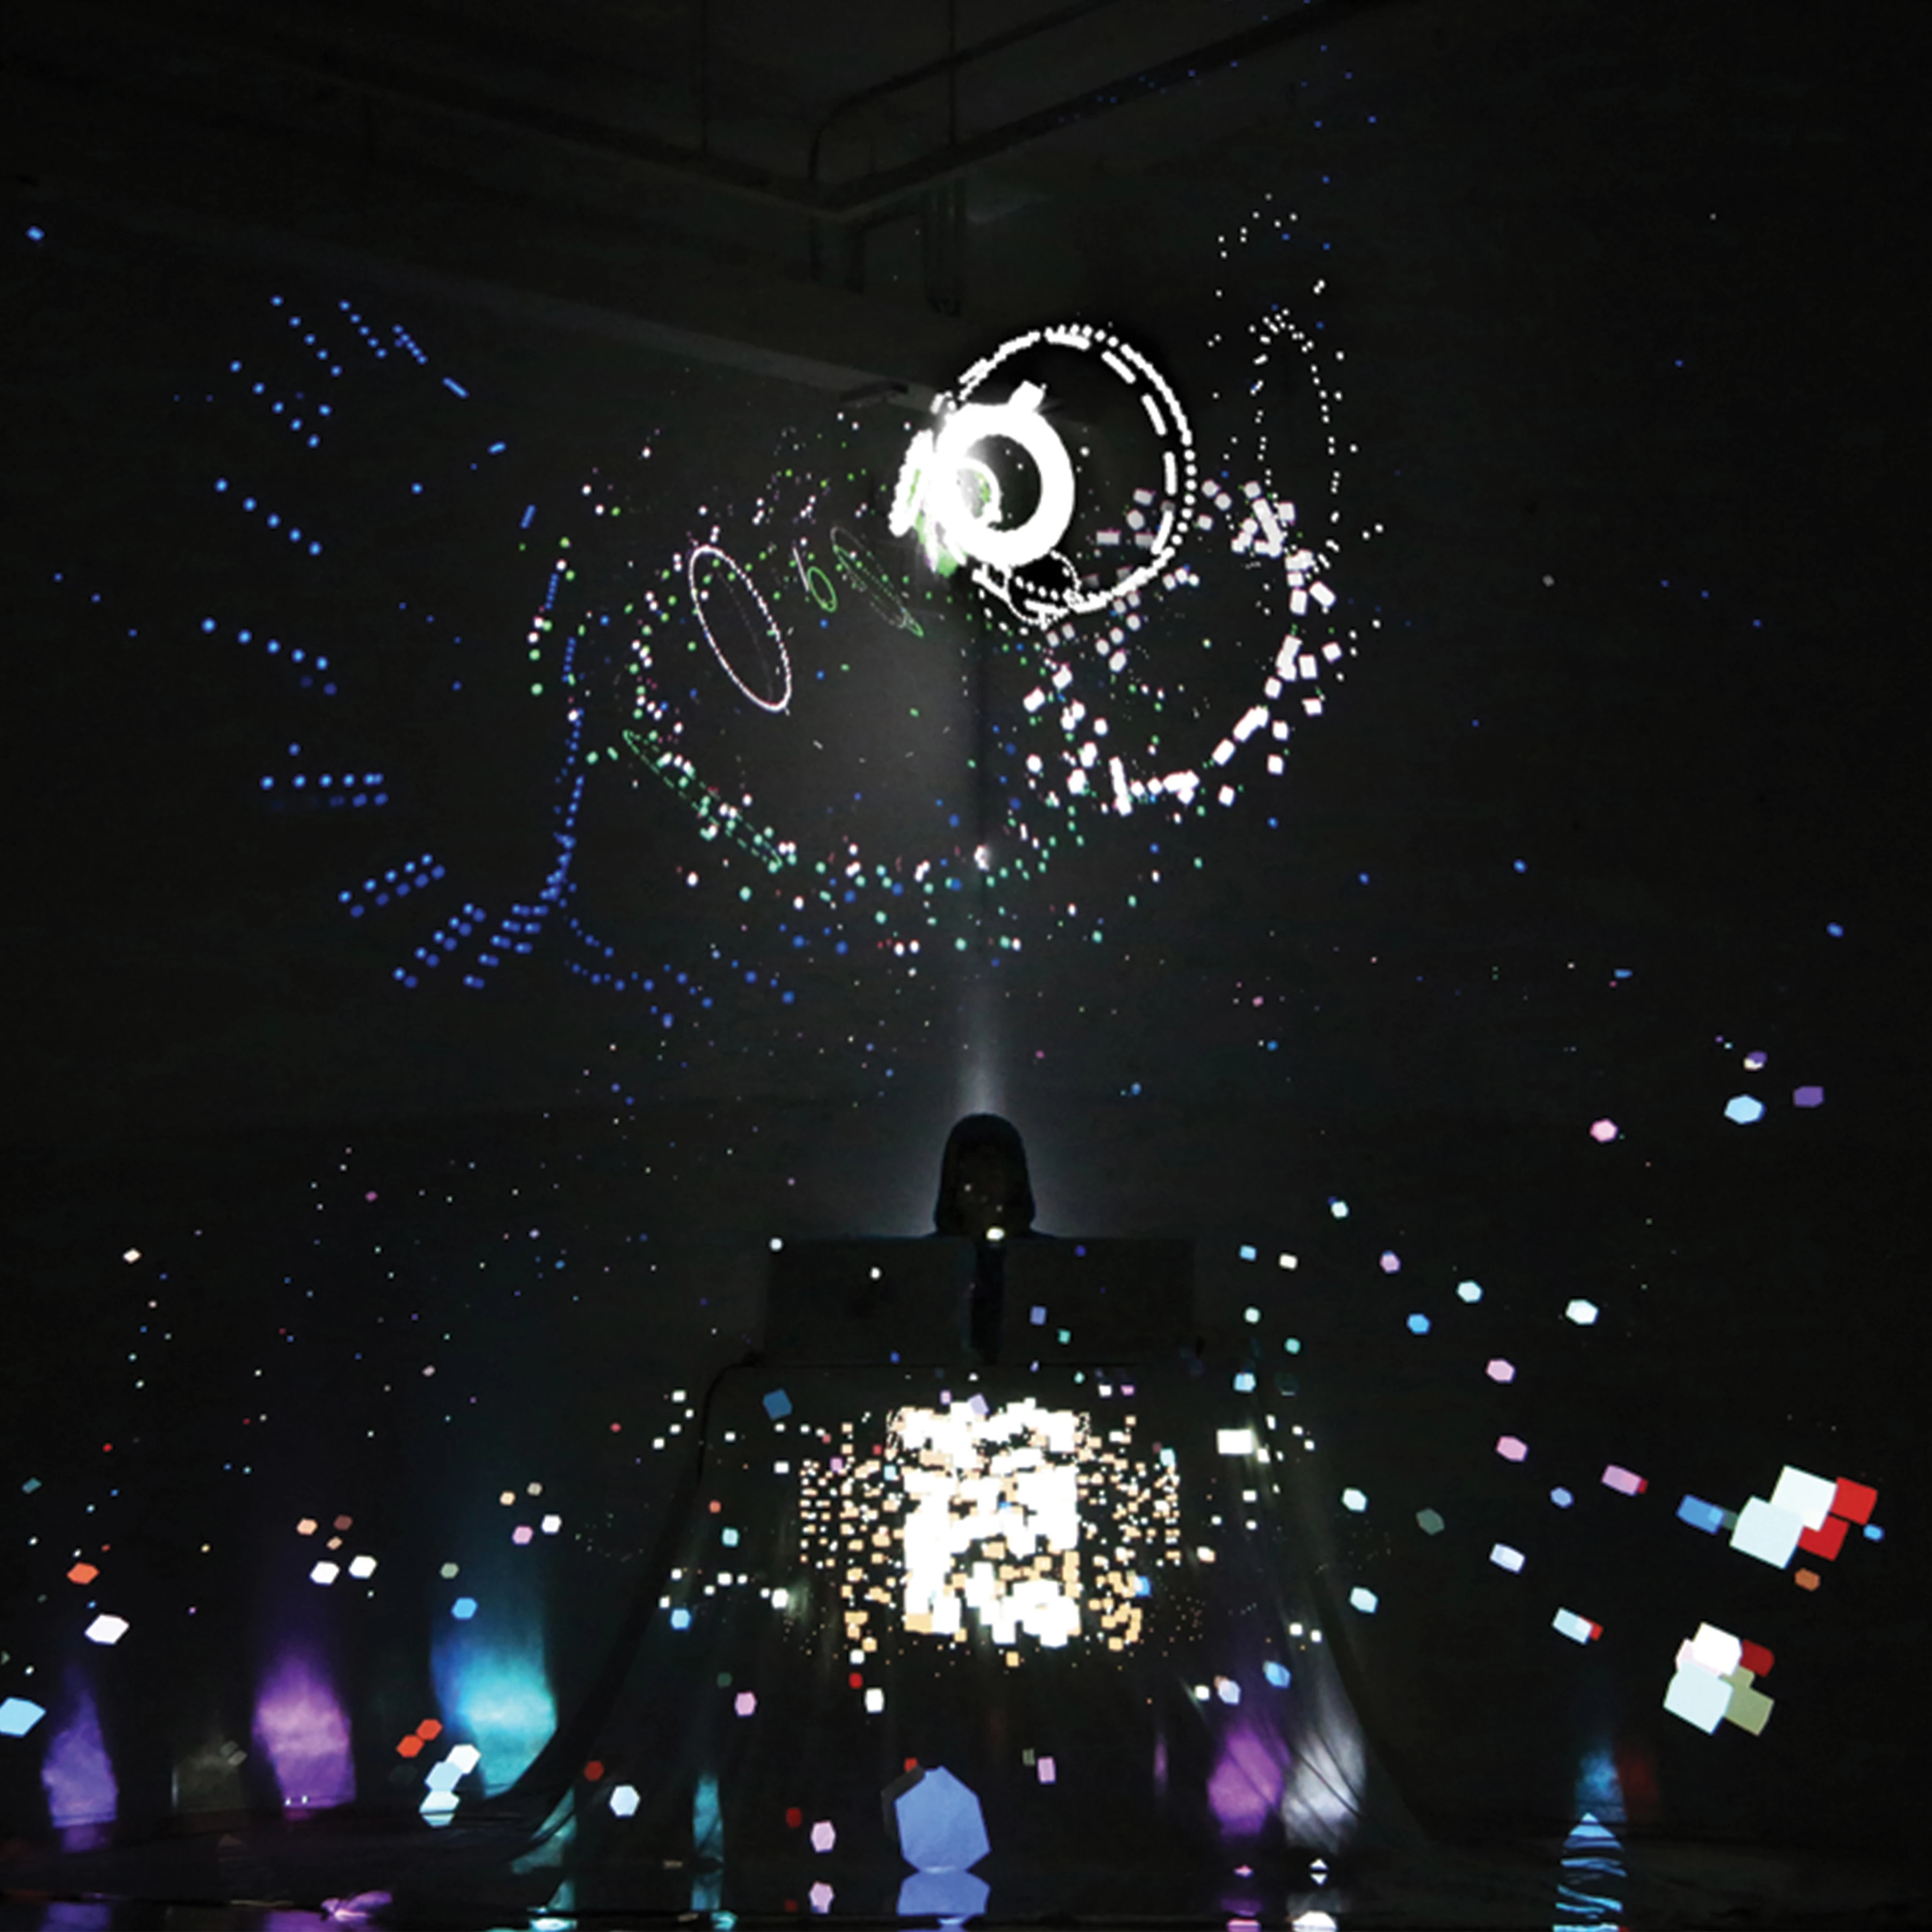 Solar System, audio-video live performance. The performer operates the installation system at the center of the stage.